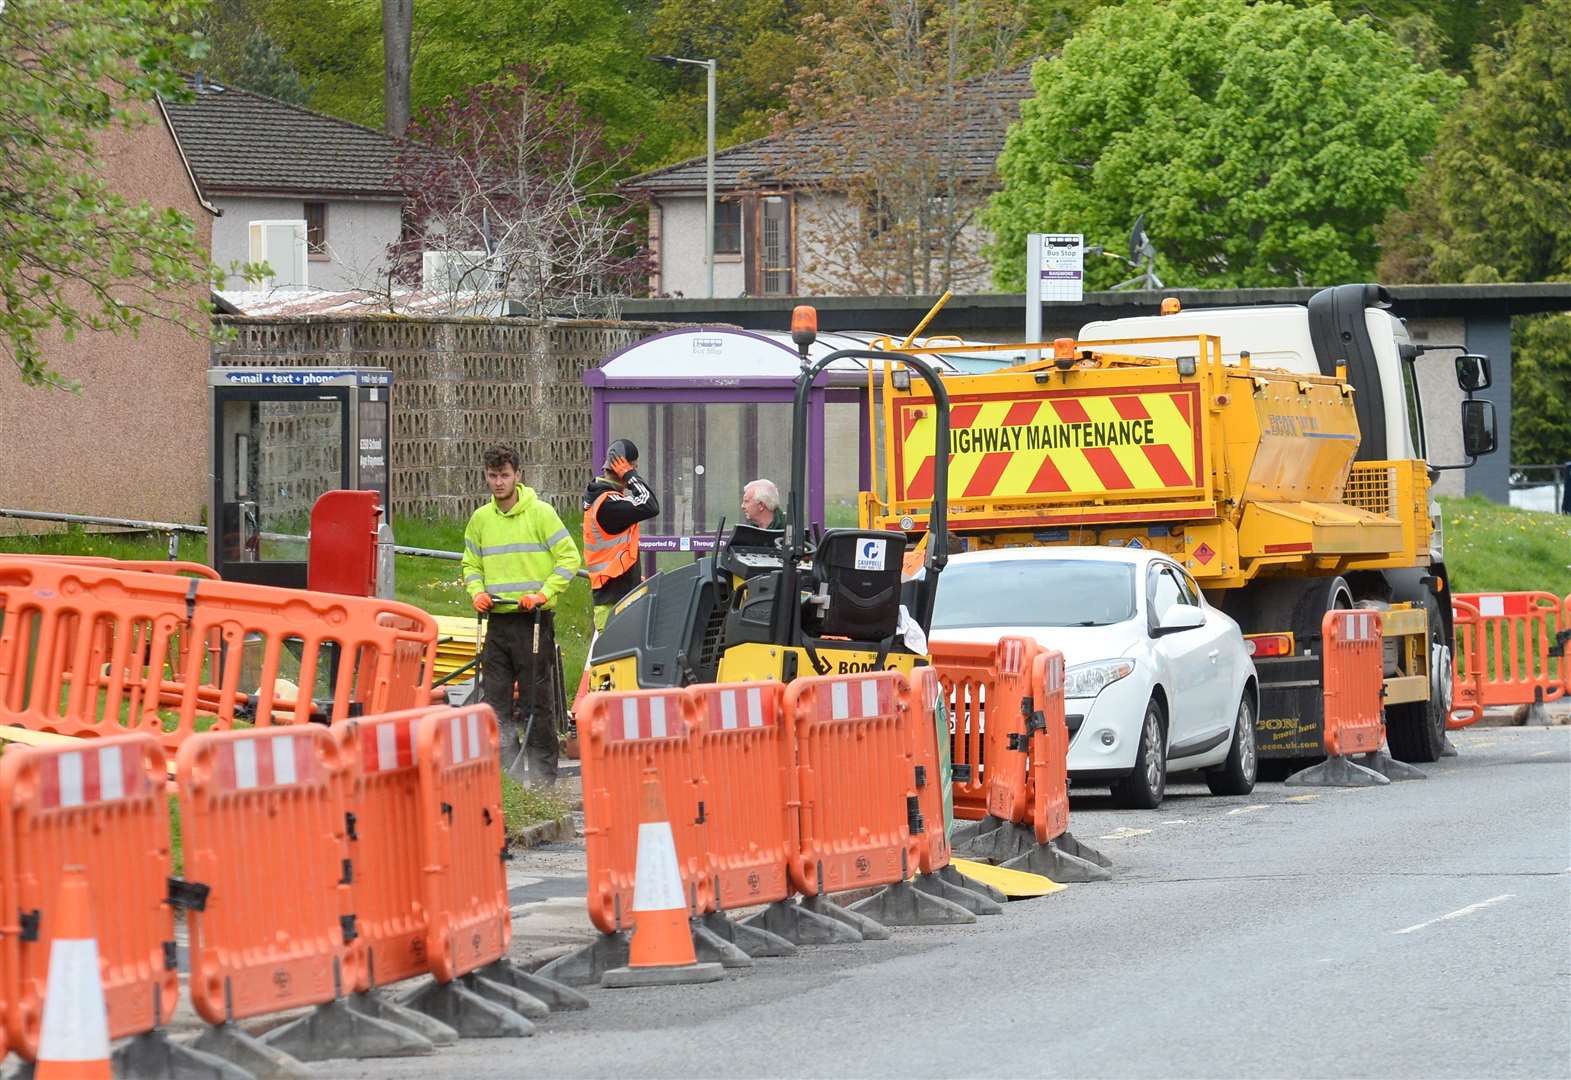 TalkTalk has been working with OpenReach and CityFibre to bring ultrafast broadband to Inverness customers.